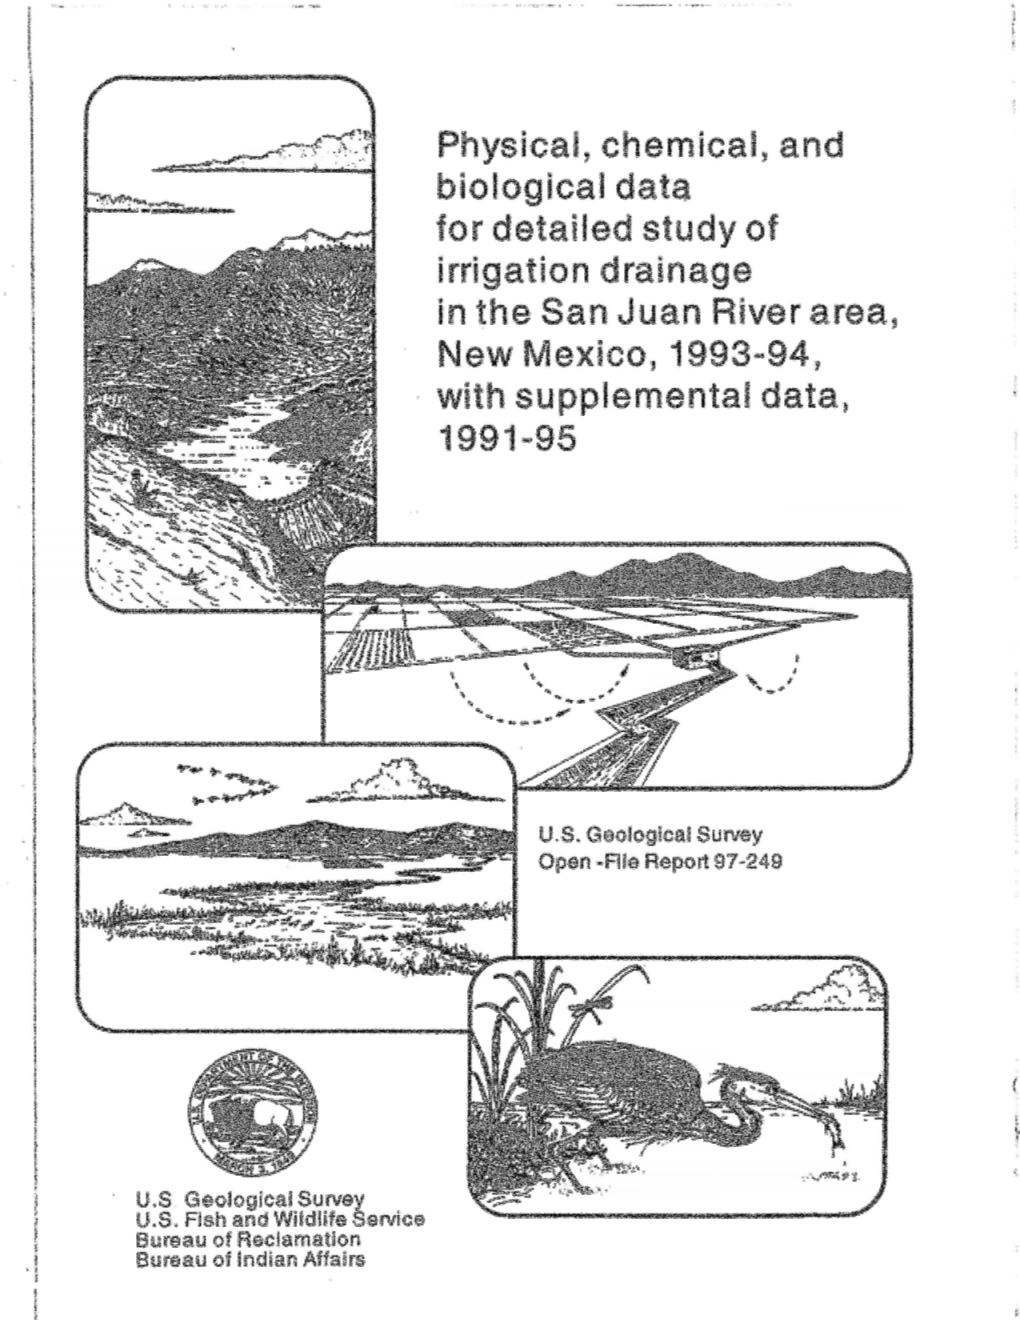 Physical, Chemical, and Biological Data for Detailed Study of I Rri Gat Ion D Ra Ina 9 E in the San Juan River Area, New Mexico